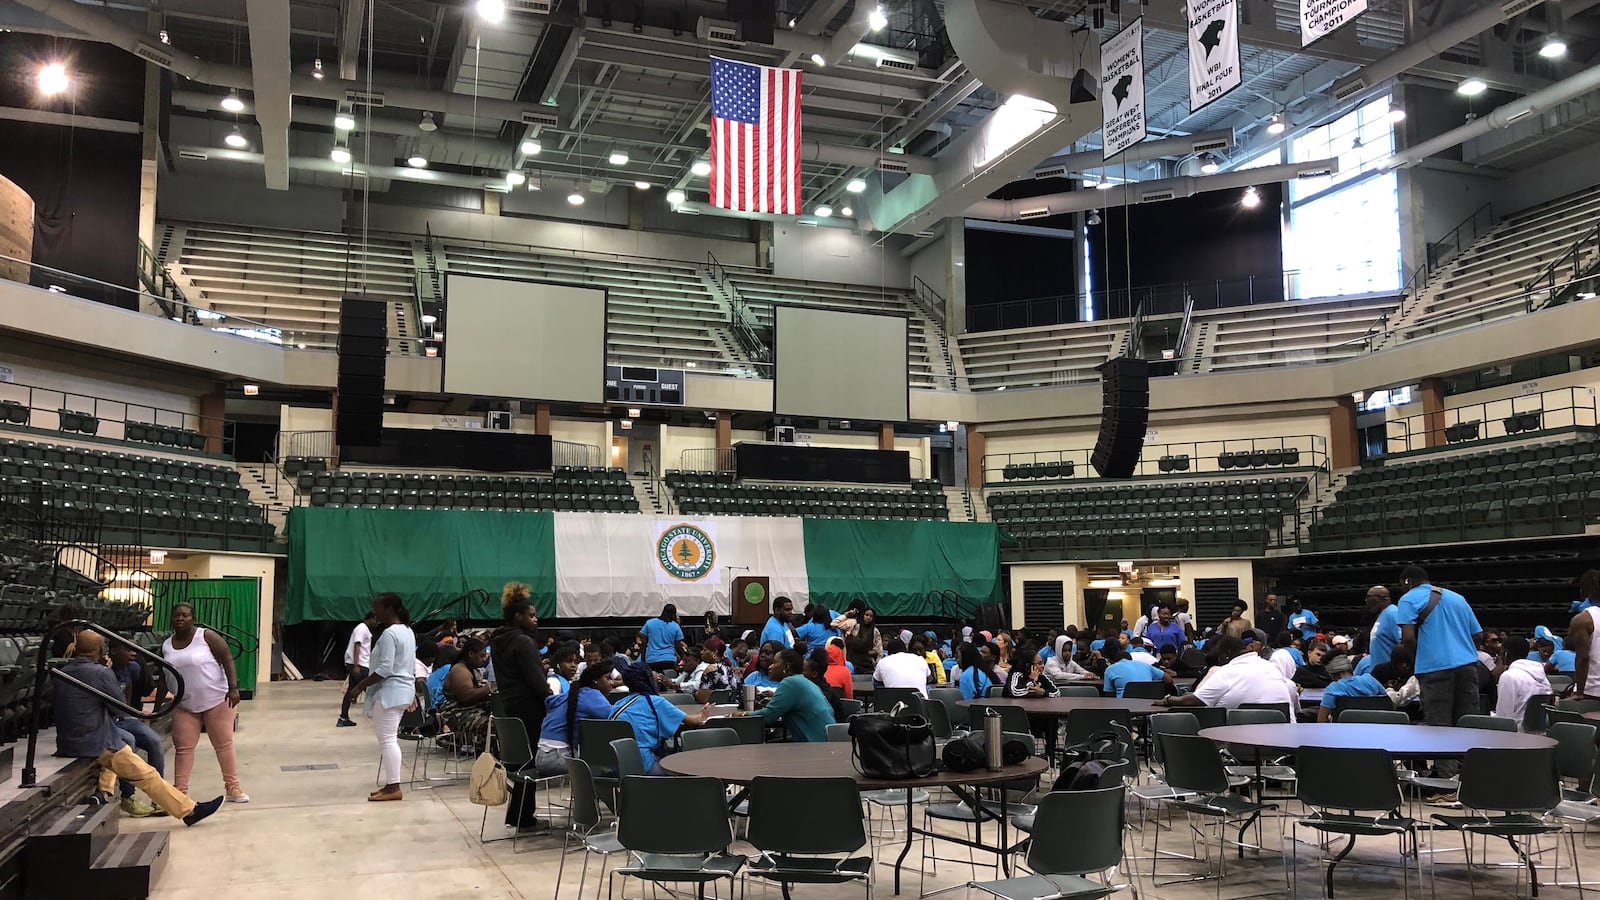 Graduates of the Summer for Change program gather at Chicago State University.